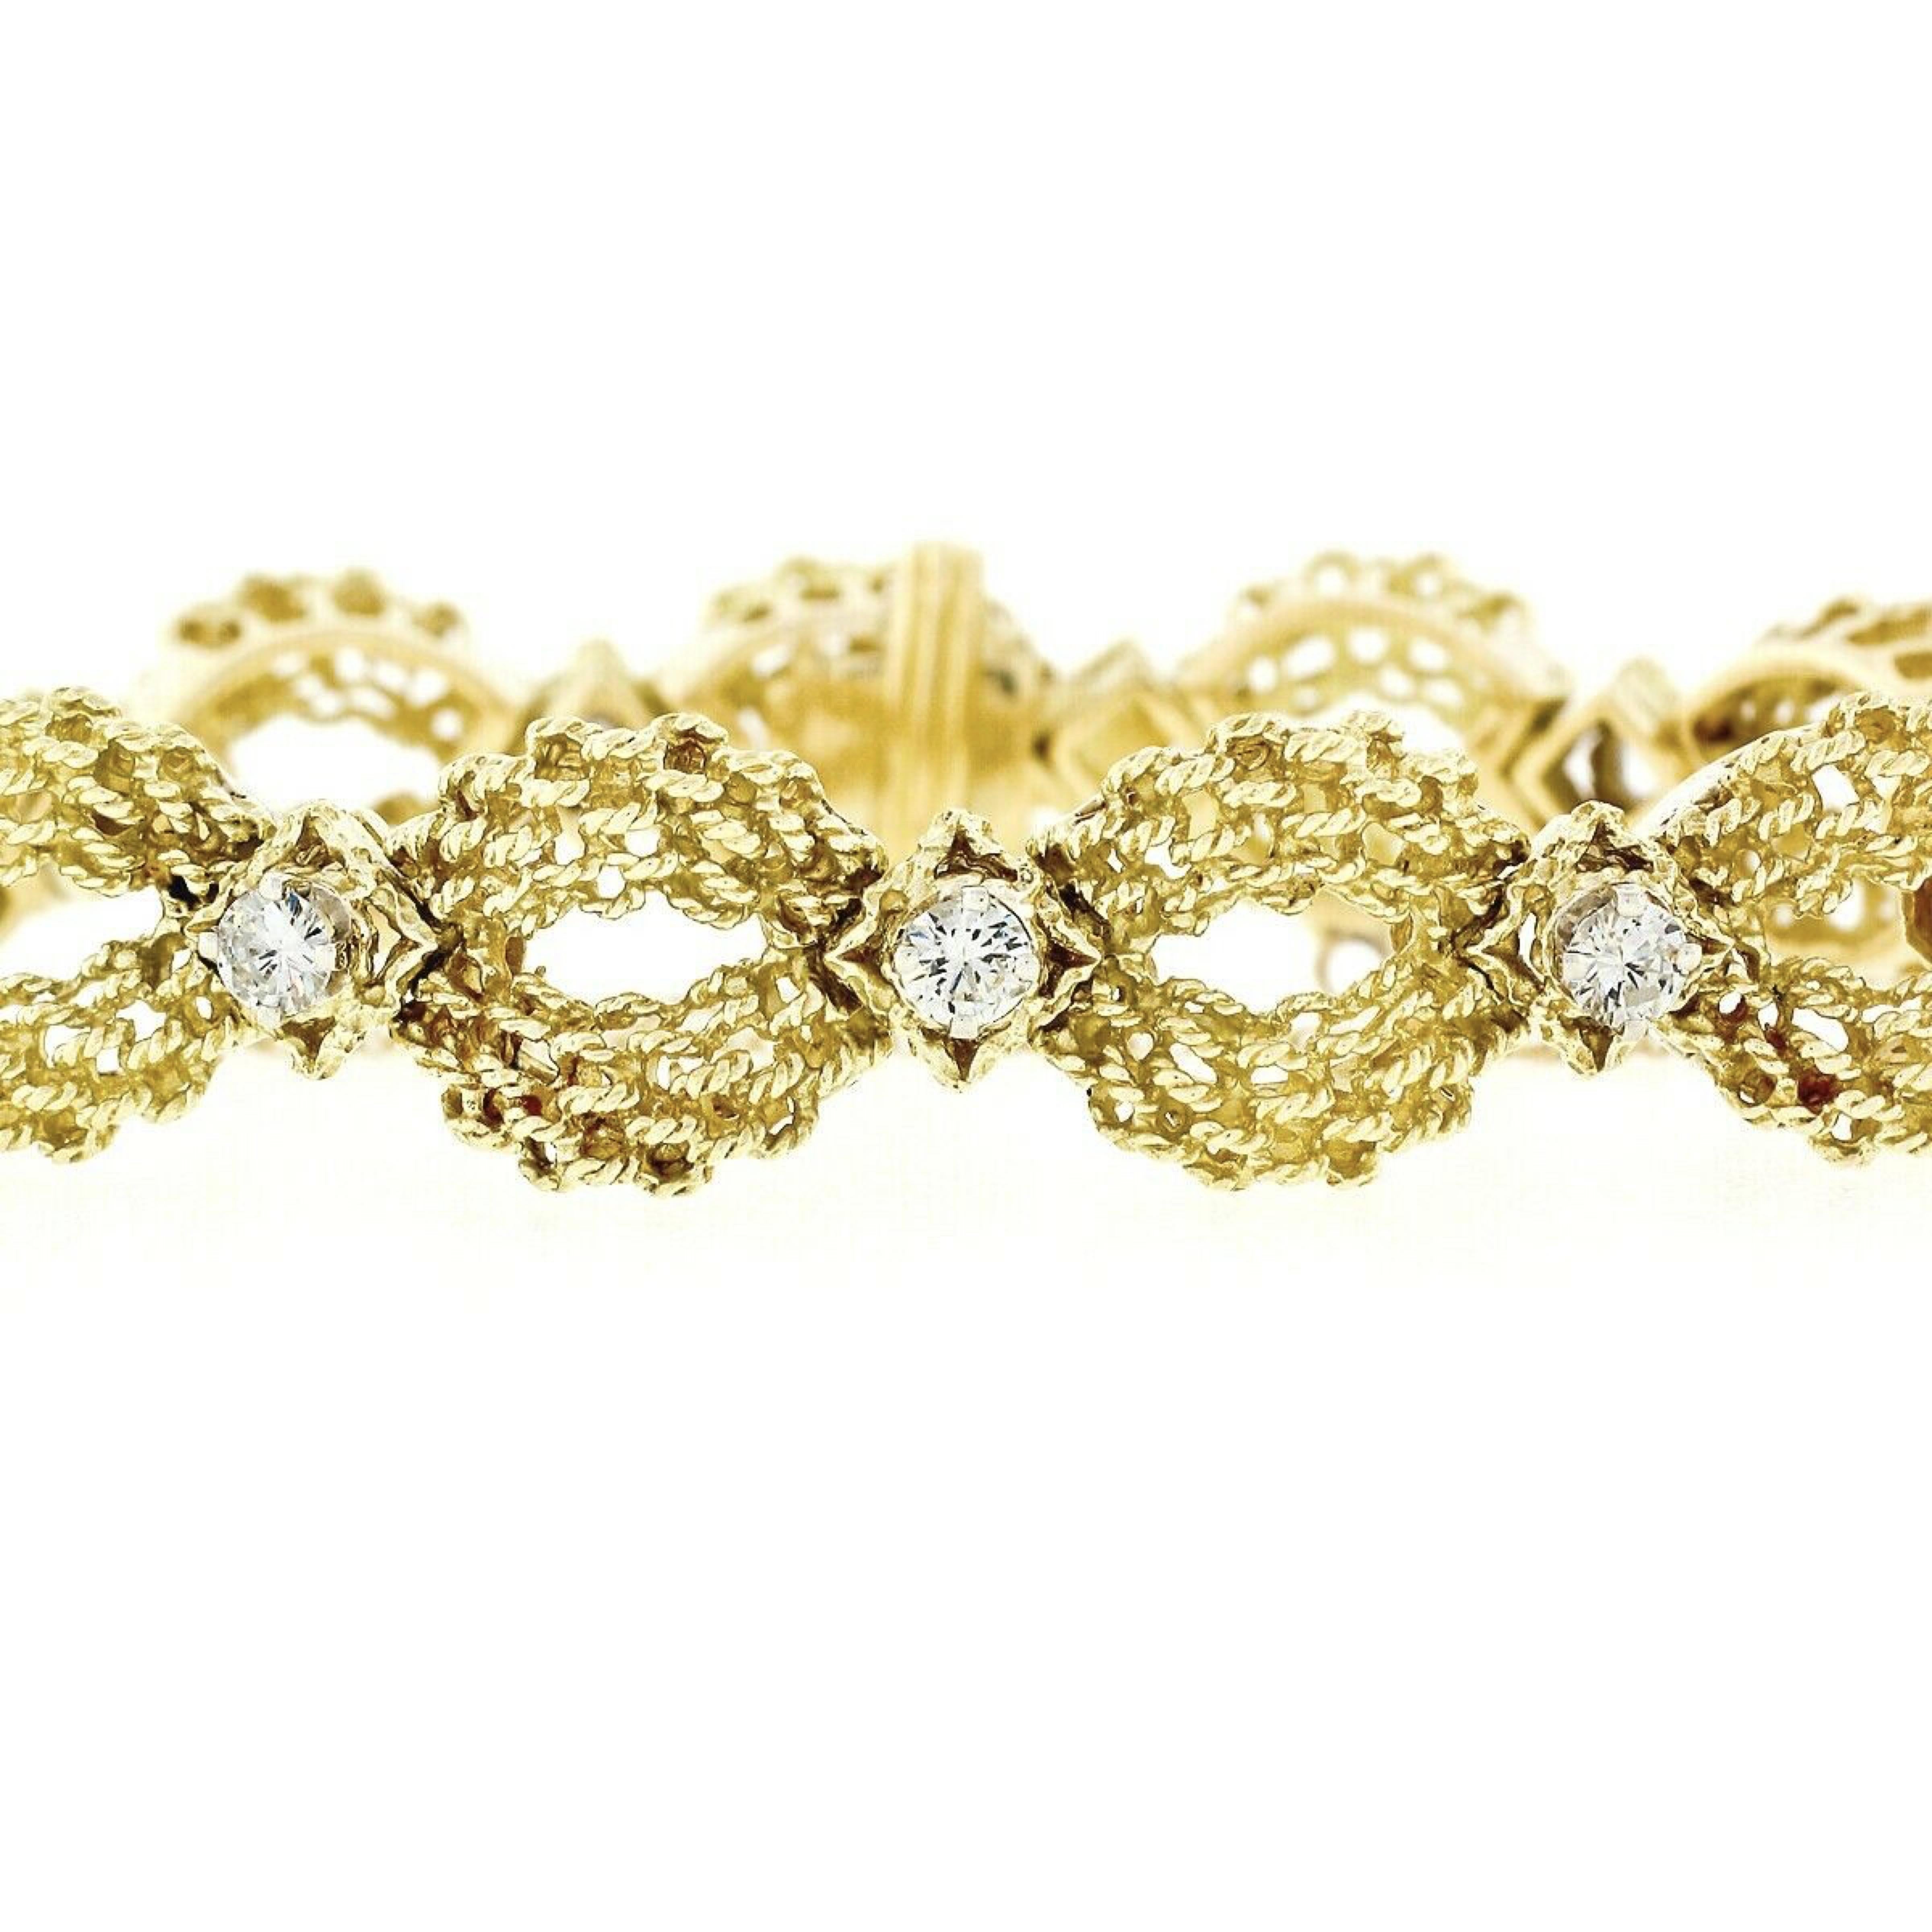 Here we have a breathtaking vintage statement bracelet, crafted in solid 18k yellow gold and features the very fine and highly detailed craftsmanship and is set with 1.51 carats of the top quality diamonds throughout. The bracelet is constructed